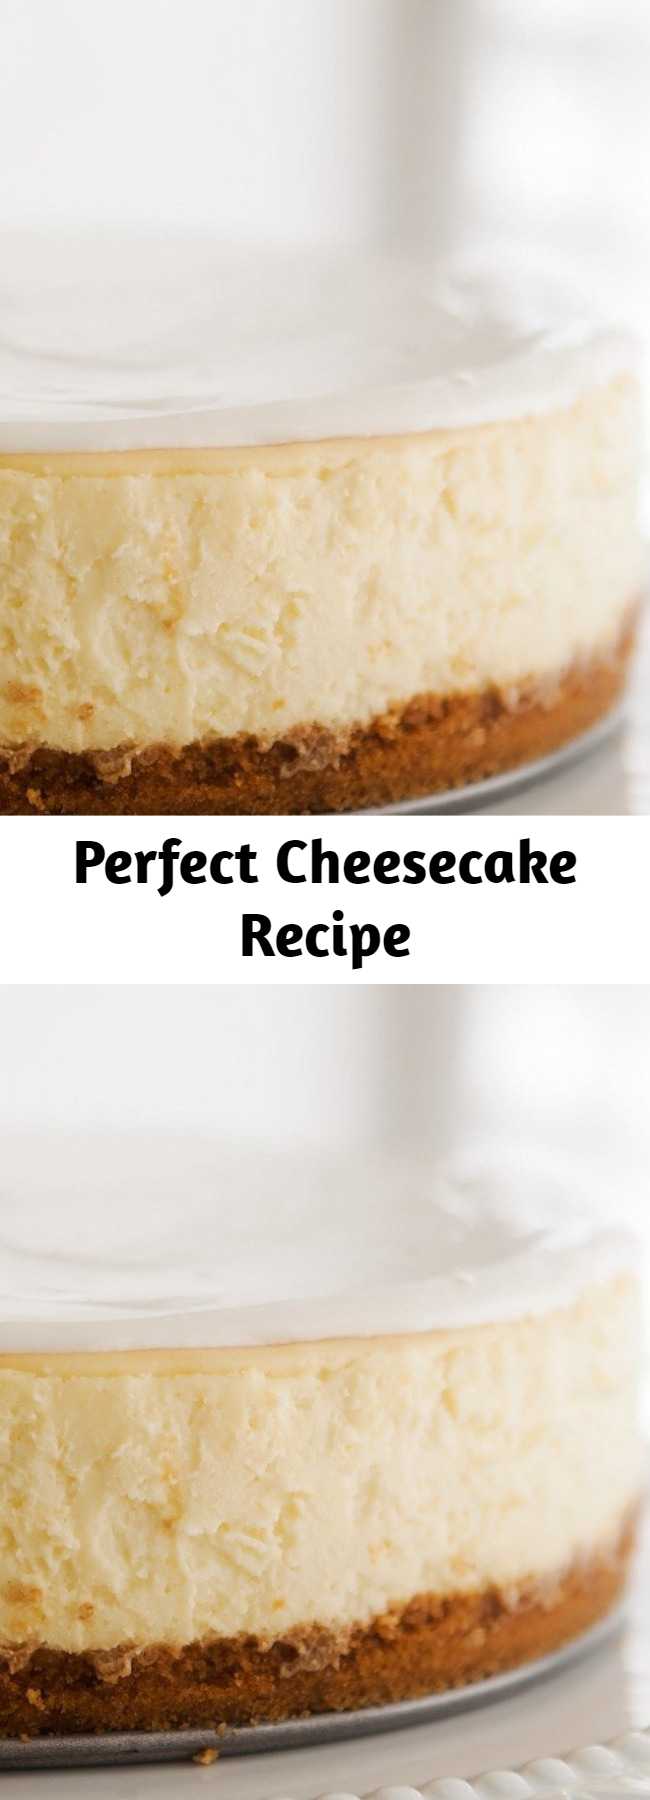 Perfect Cheesecake Recipe - Say hello to your new favorite cheesecake recipe! This is a classic New York cheesecake, baked in the oven. A water bath, plus lots of tips and guidance, help you make the best, silkiest, creamiest cheesecake EVER.